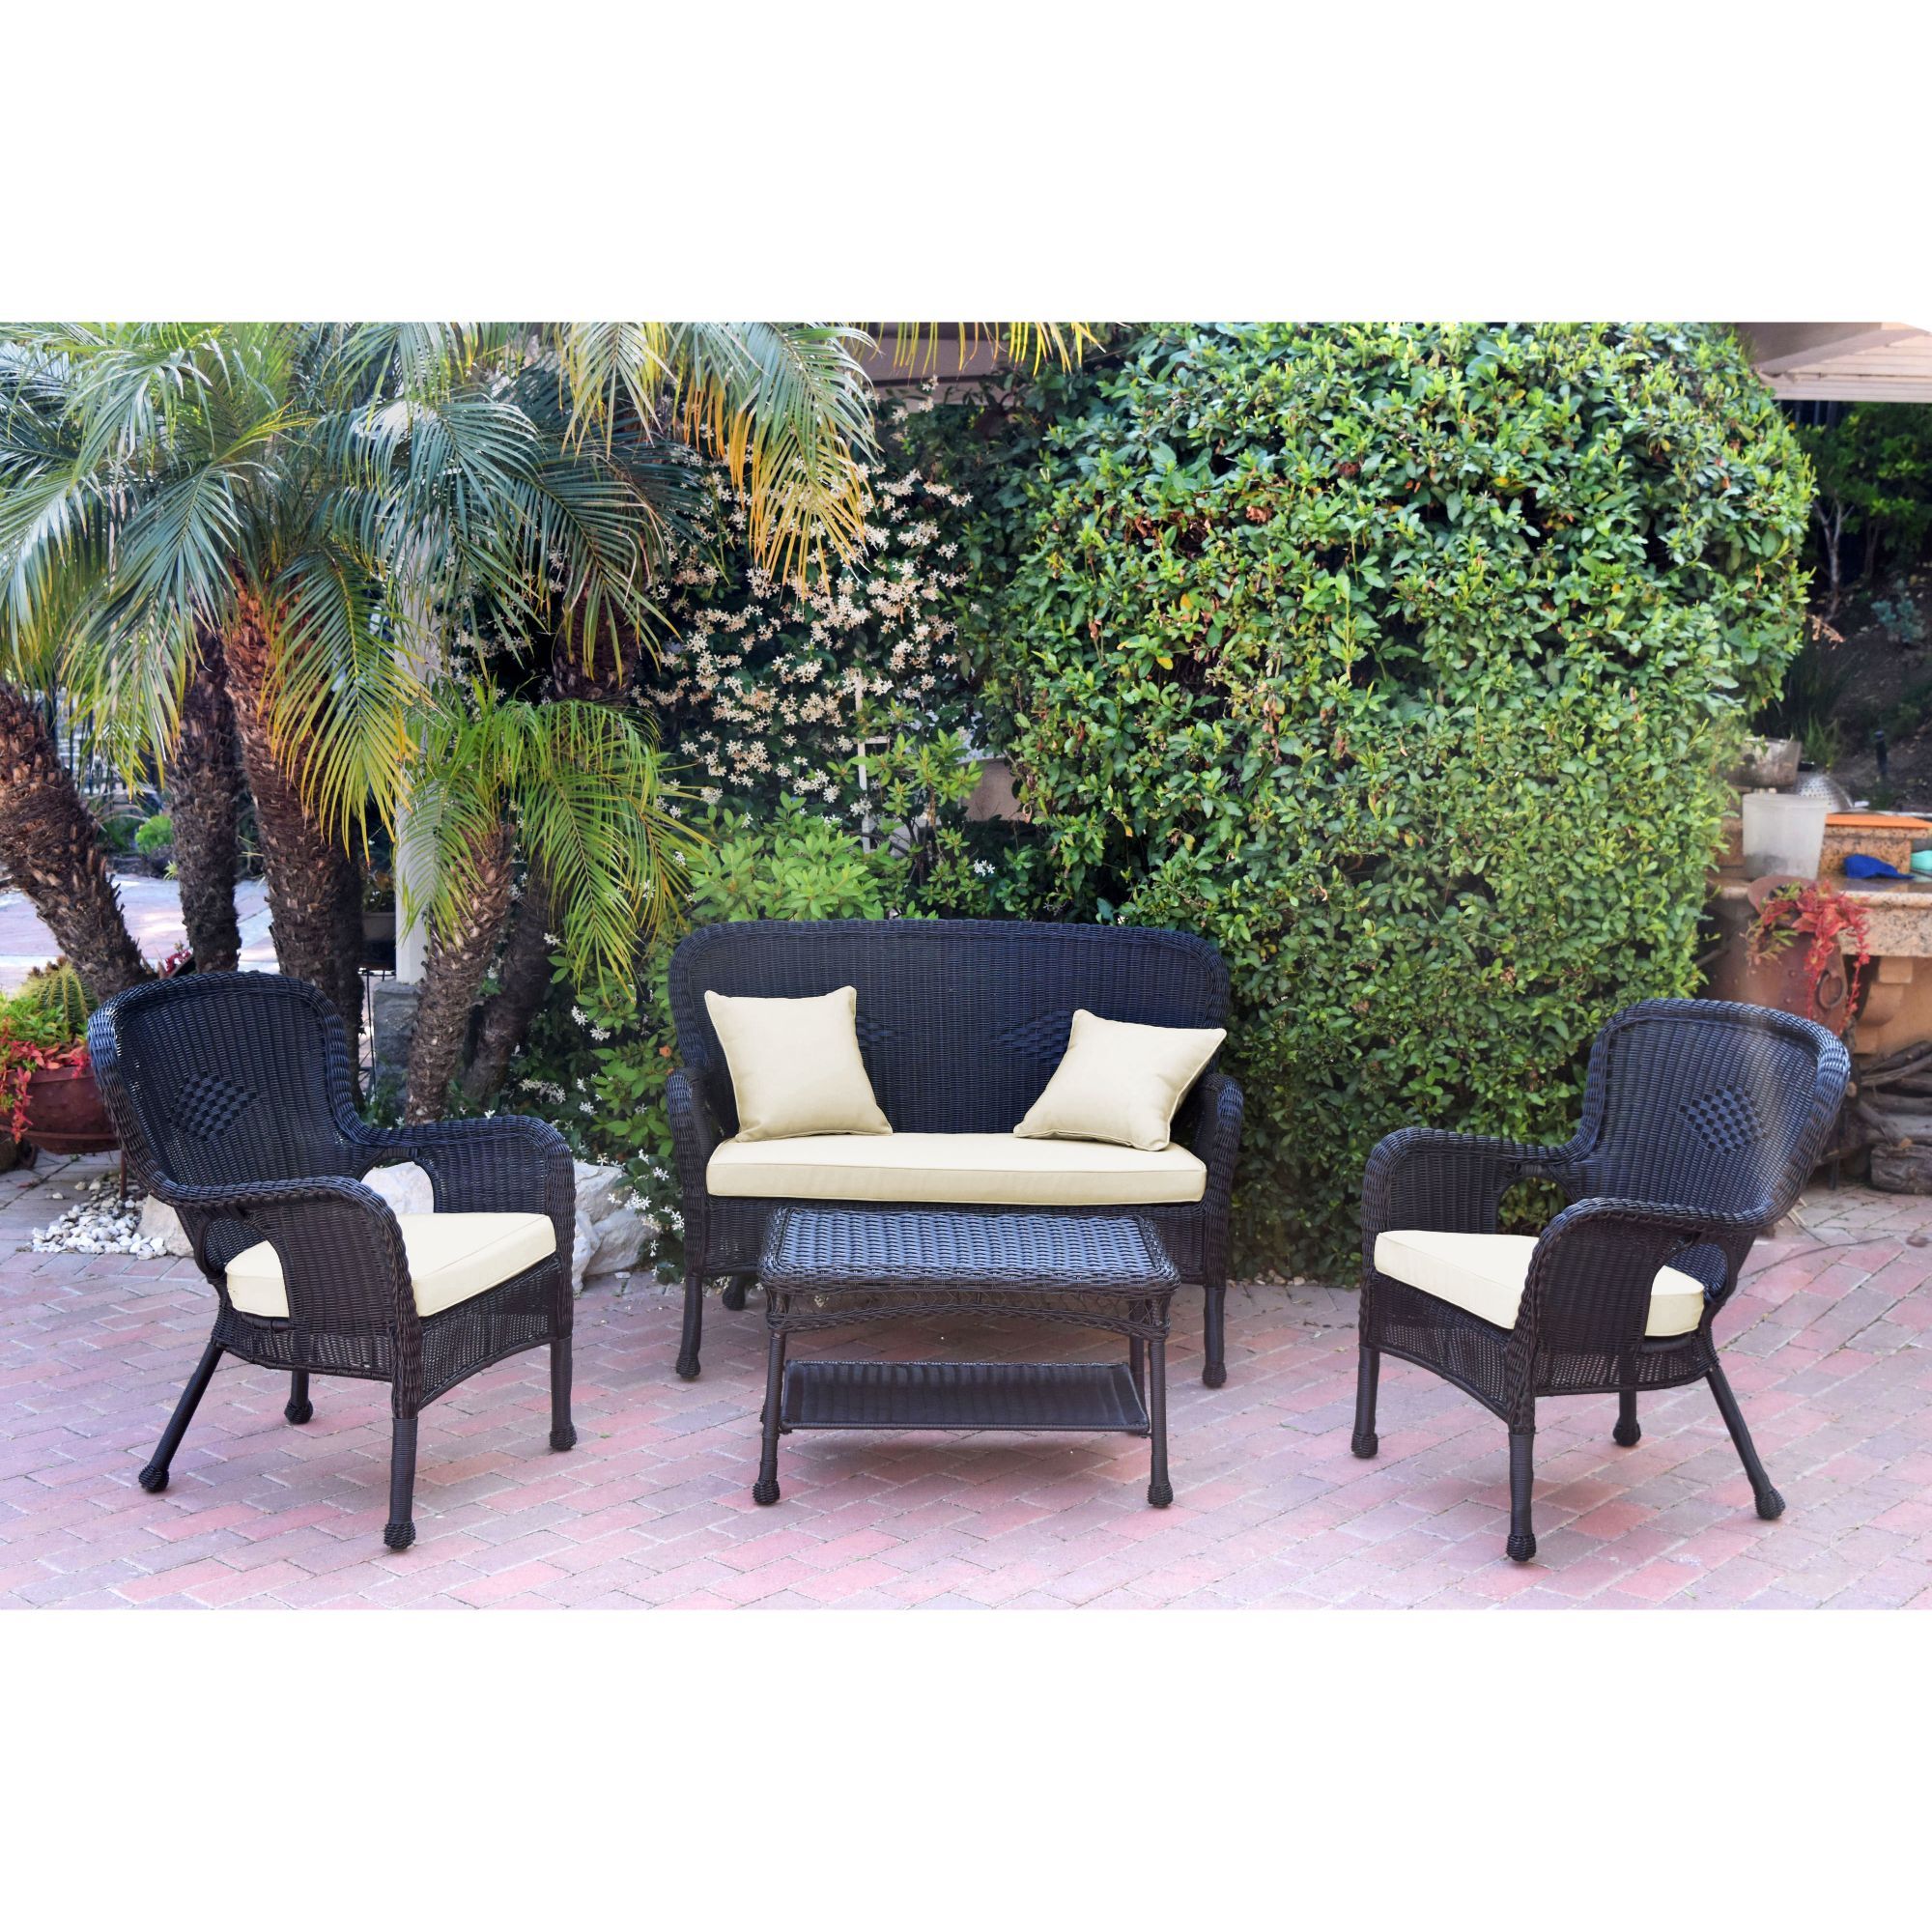 4 Piece Black Wicker Outdoor Furniture Patio Conversation Set – Ivory Inside Dark Brown Patio Chairs With Cushions (View 2 of 15)